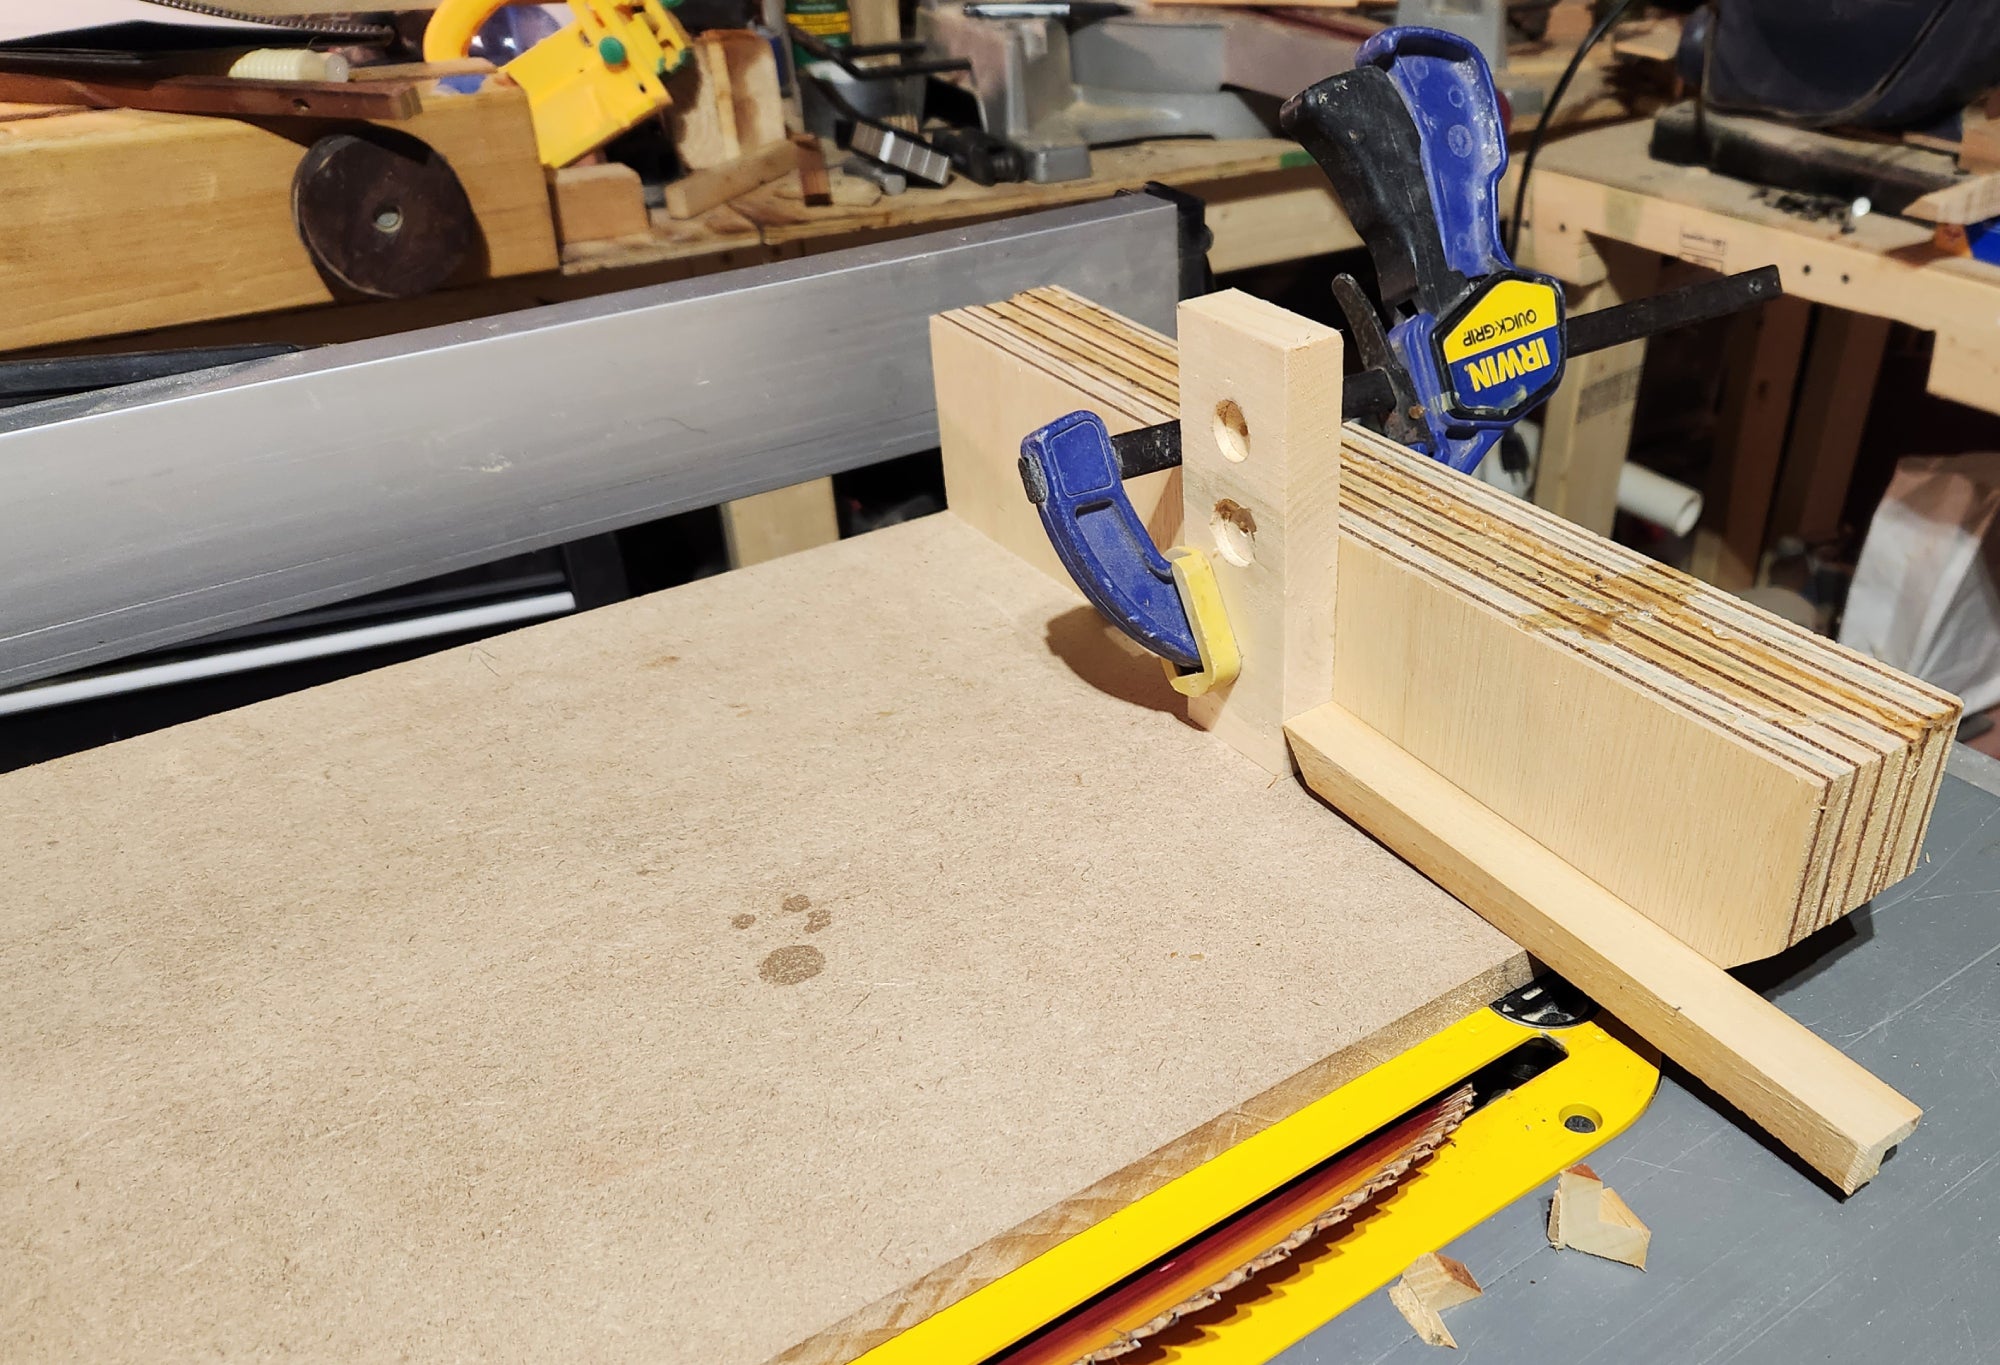 A table saw set at a 45-degree angle, being used to cut DIY picture frame pieces at mitered angles, with a stop block.